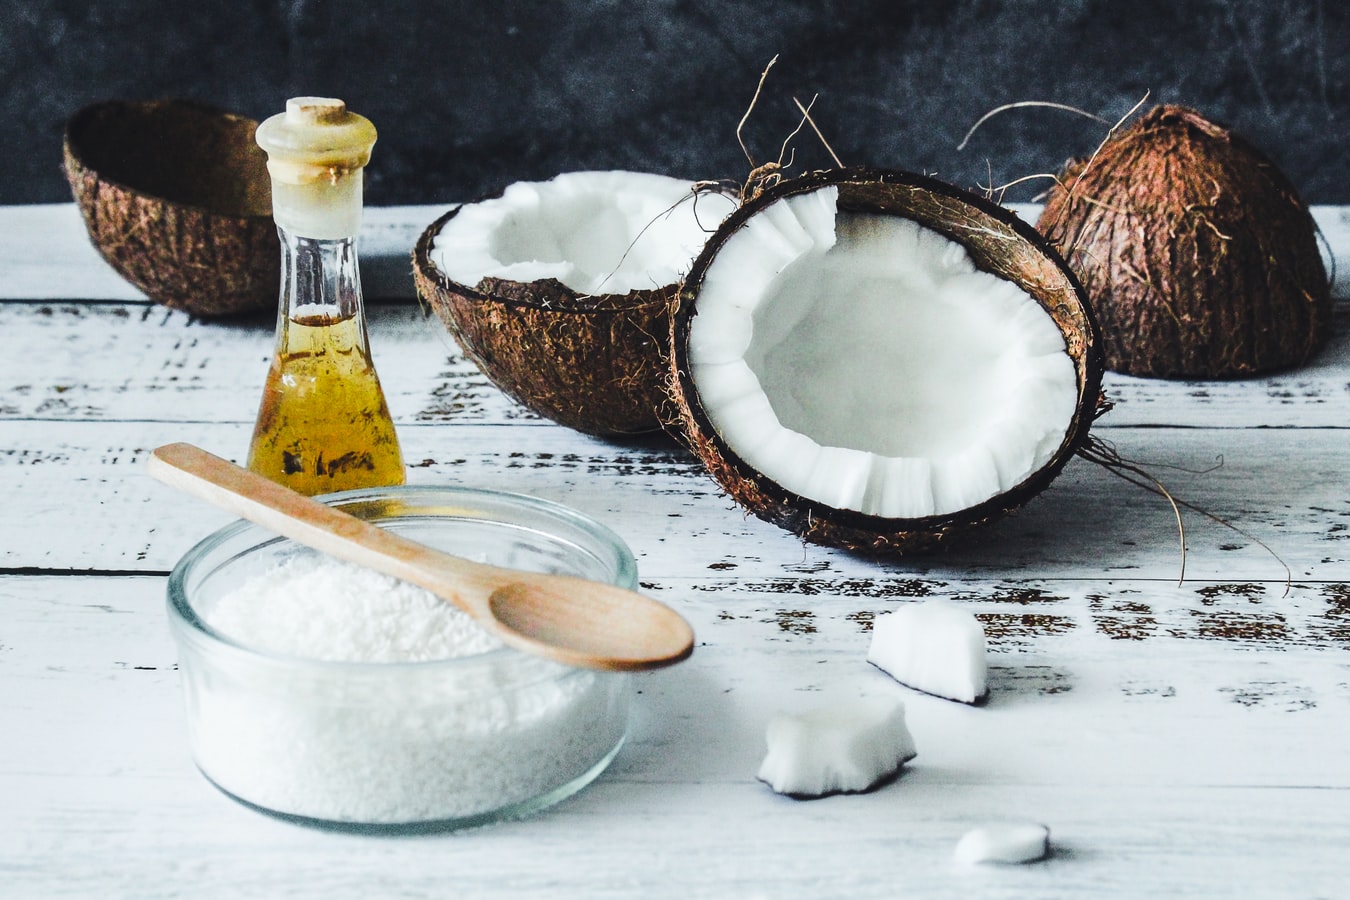 What Makes Coconut Oil So Good For Our Hair